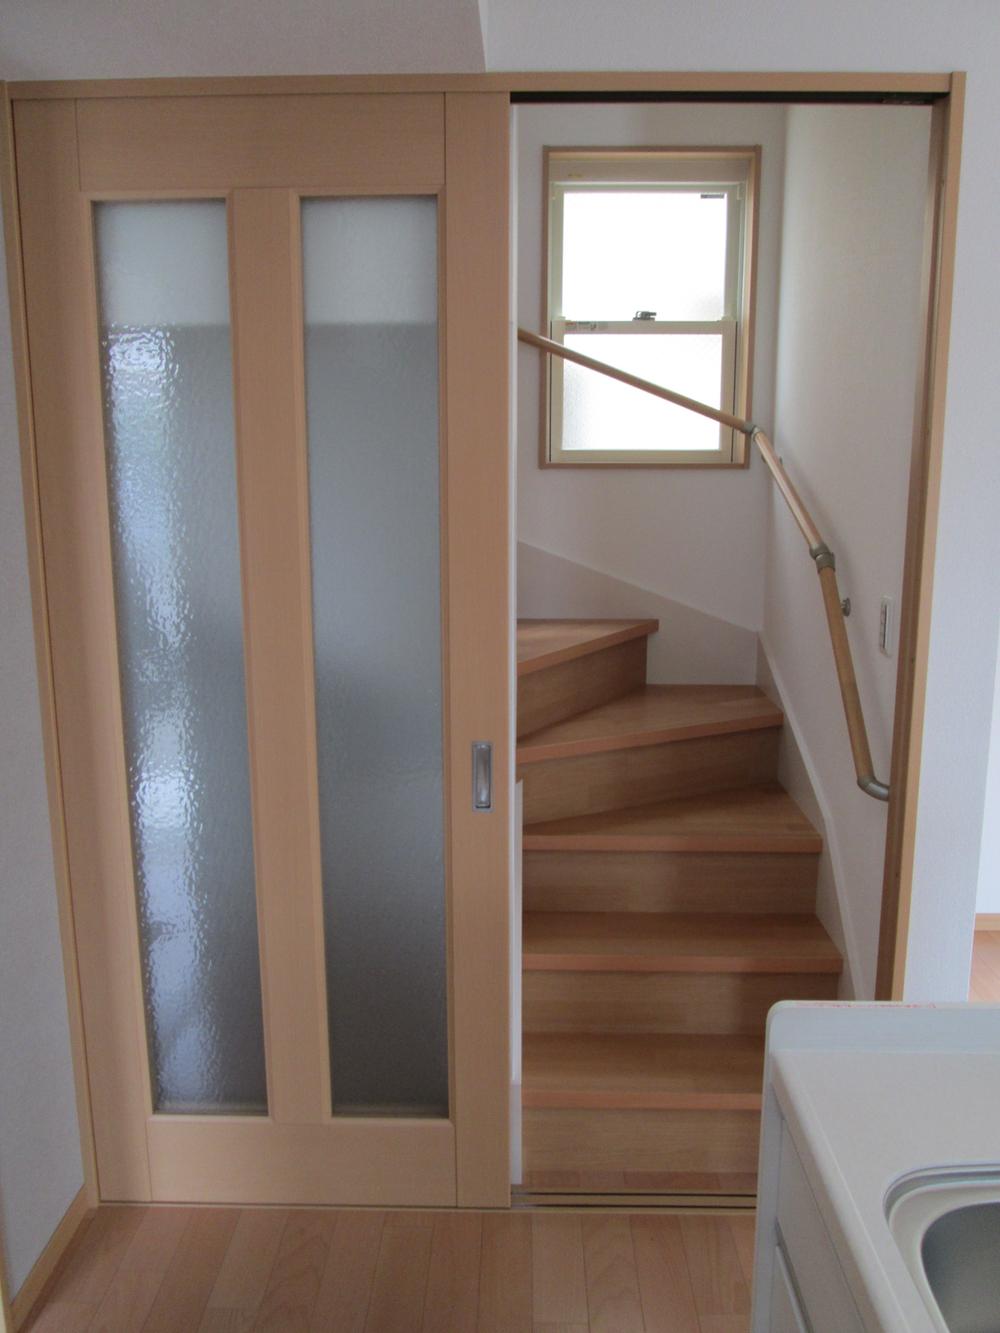 Other. Living stairs at the entrance sliding door